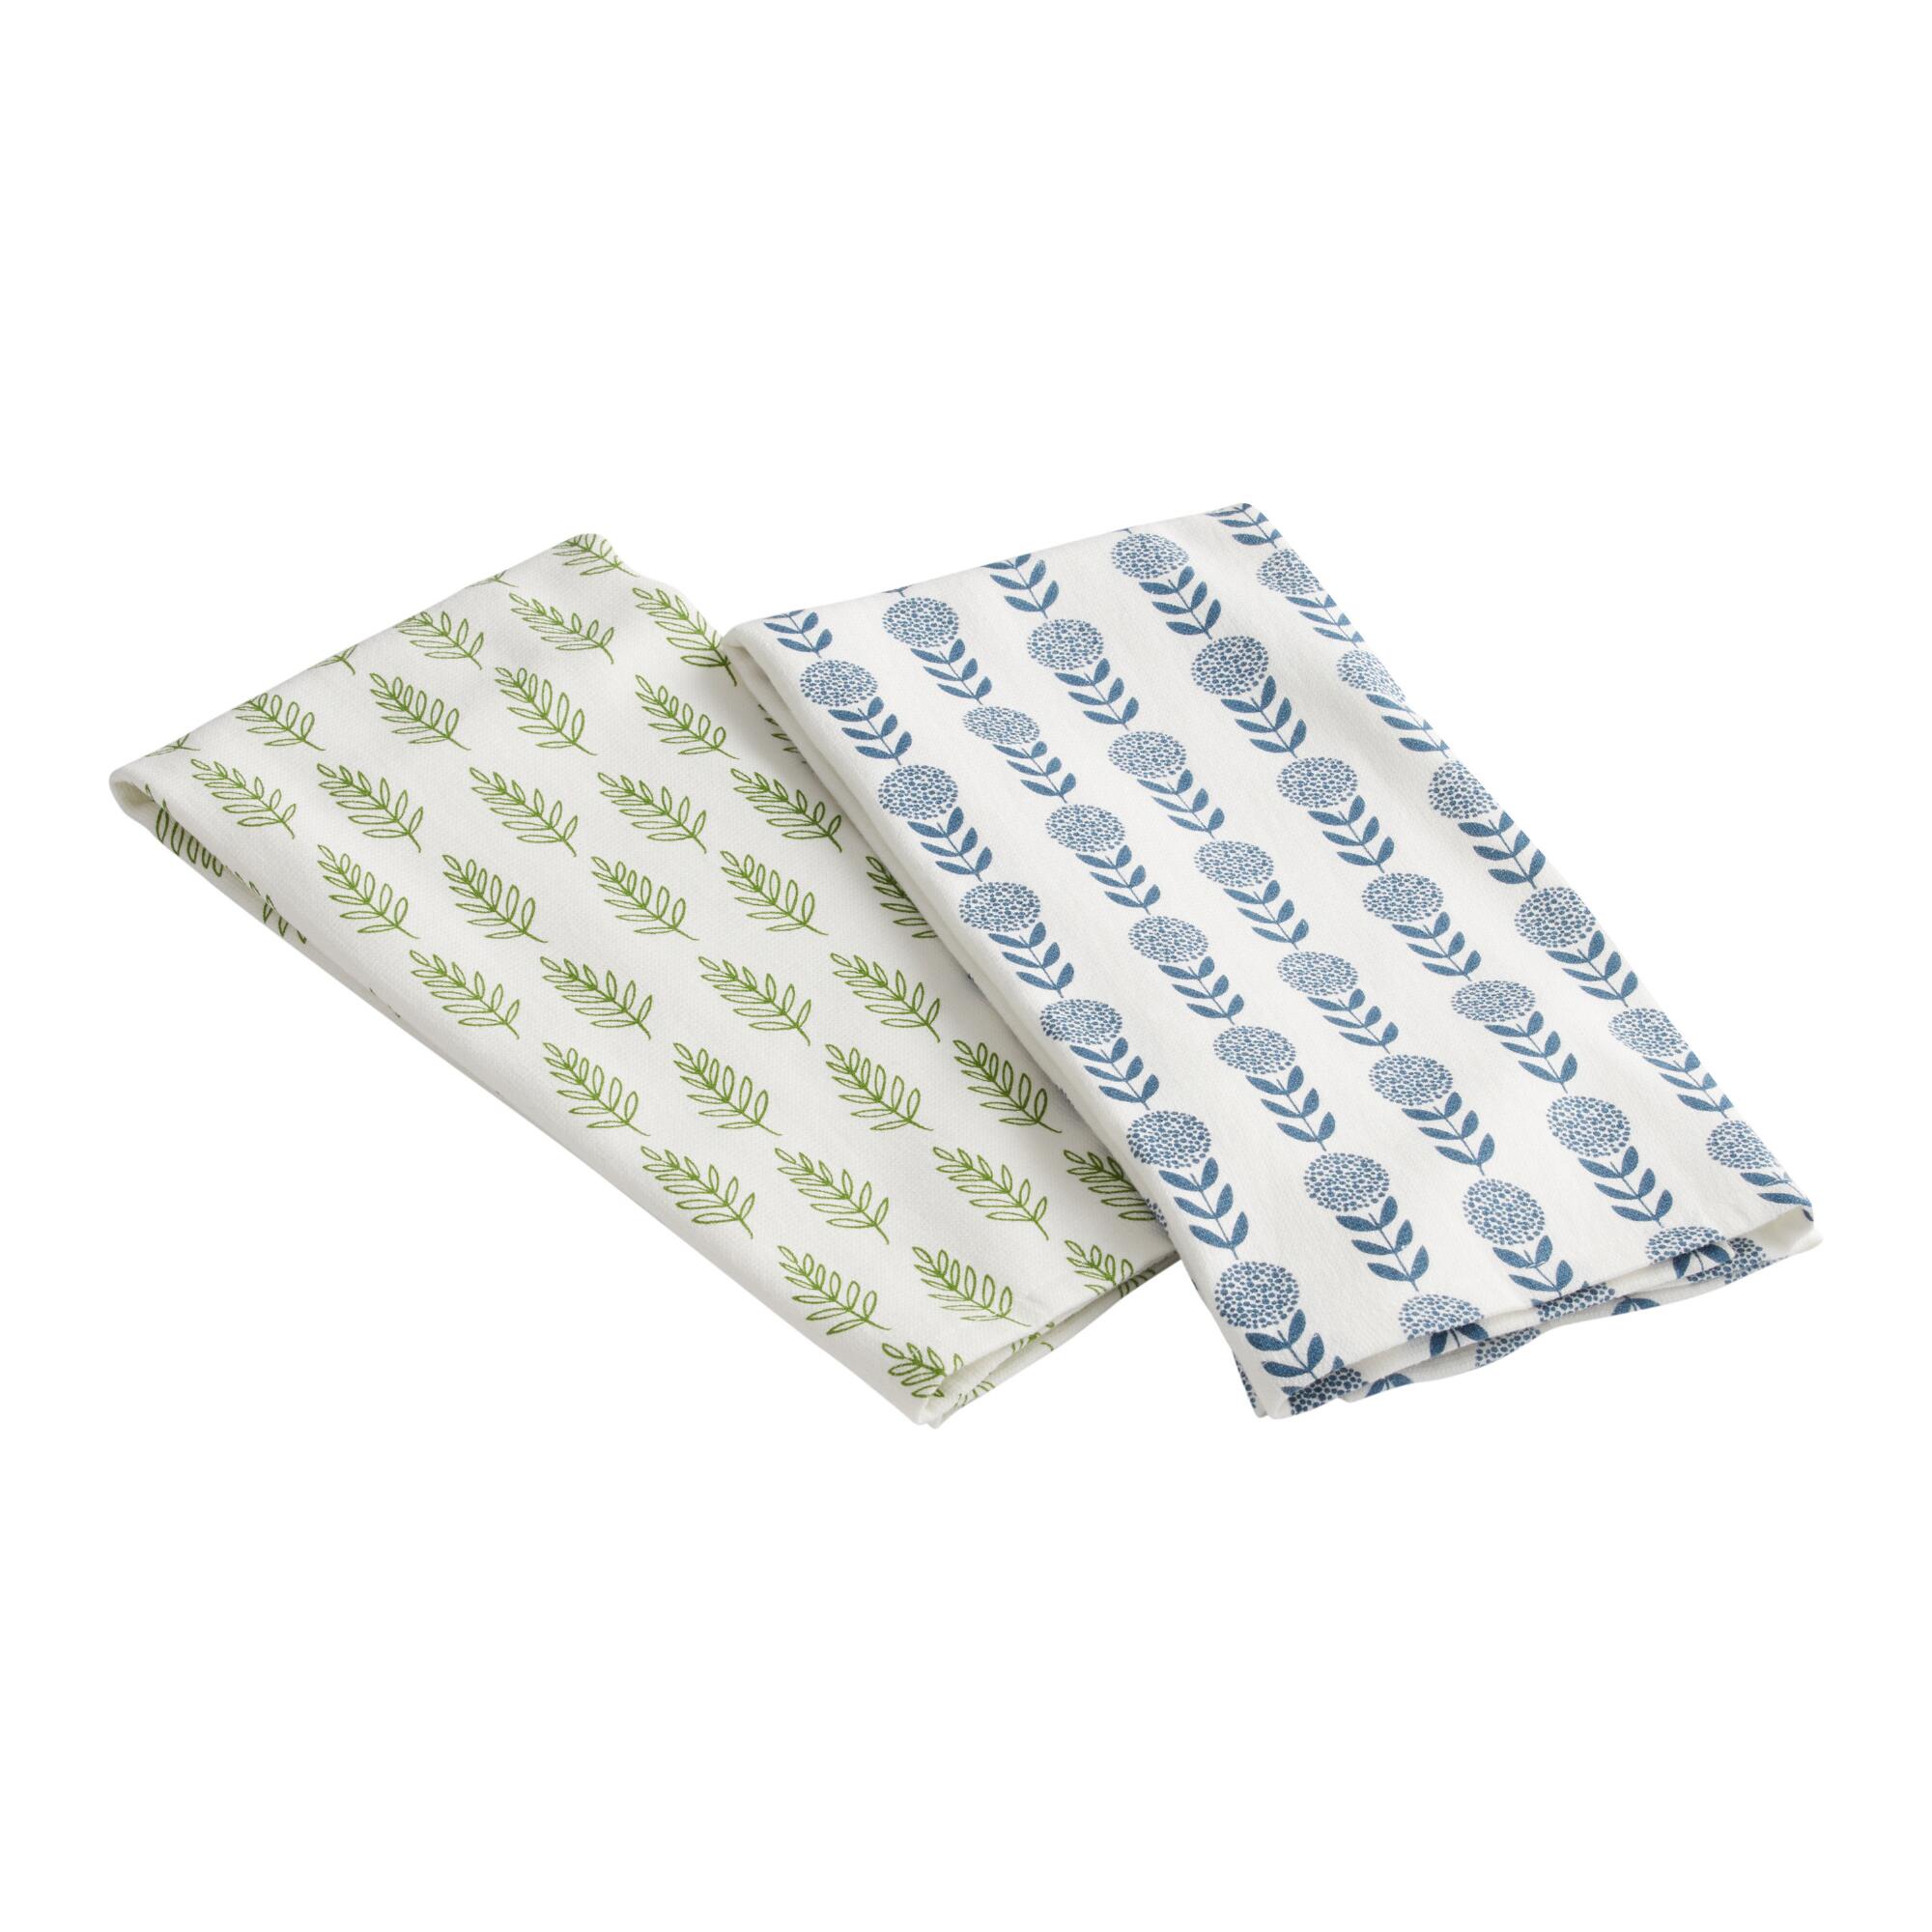 Botanical Terry Cloth Kitchen Towel Set of 2 by World Market